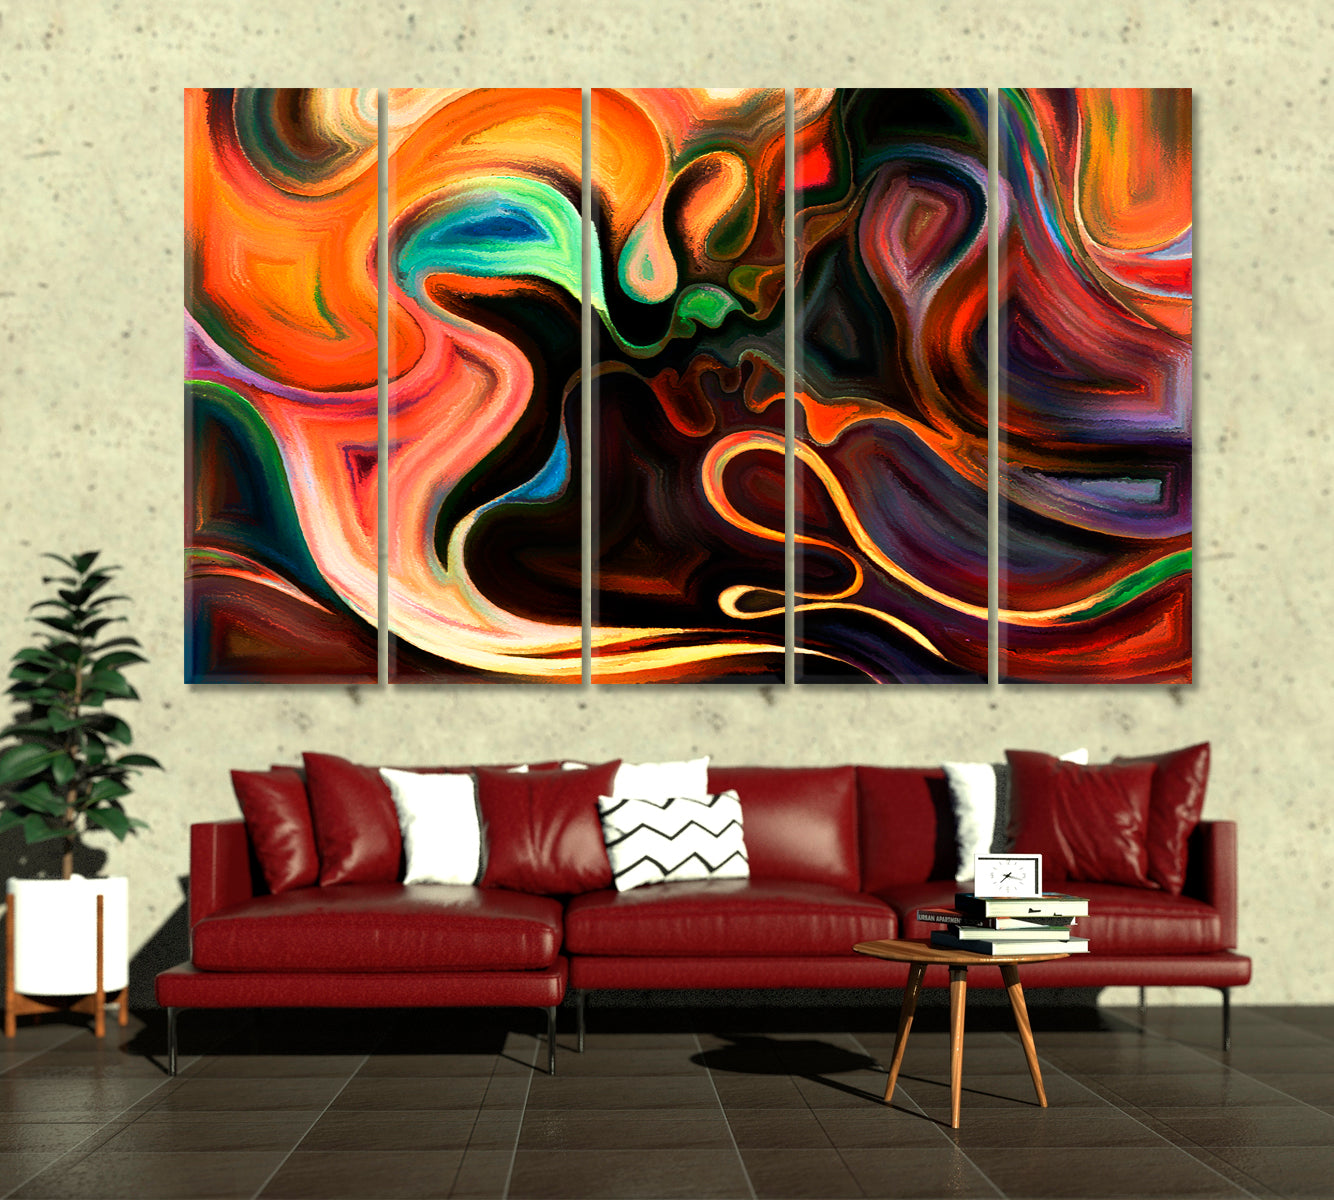 Feminine and Male Colorful Curves Game Abstract Art Print Artesty 5 panels 36" x 24" 